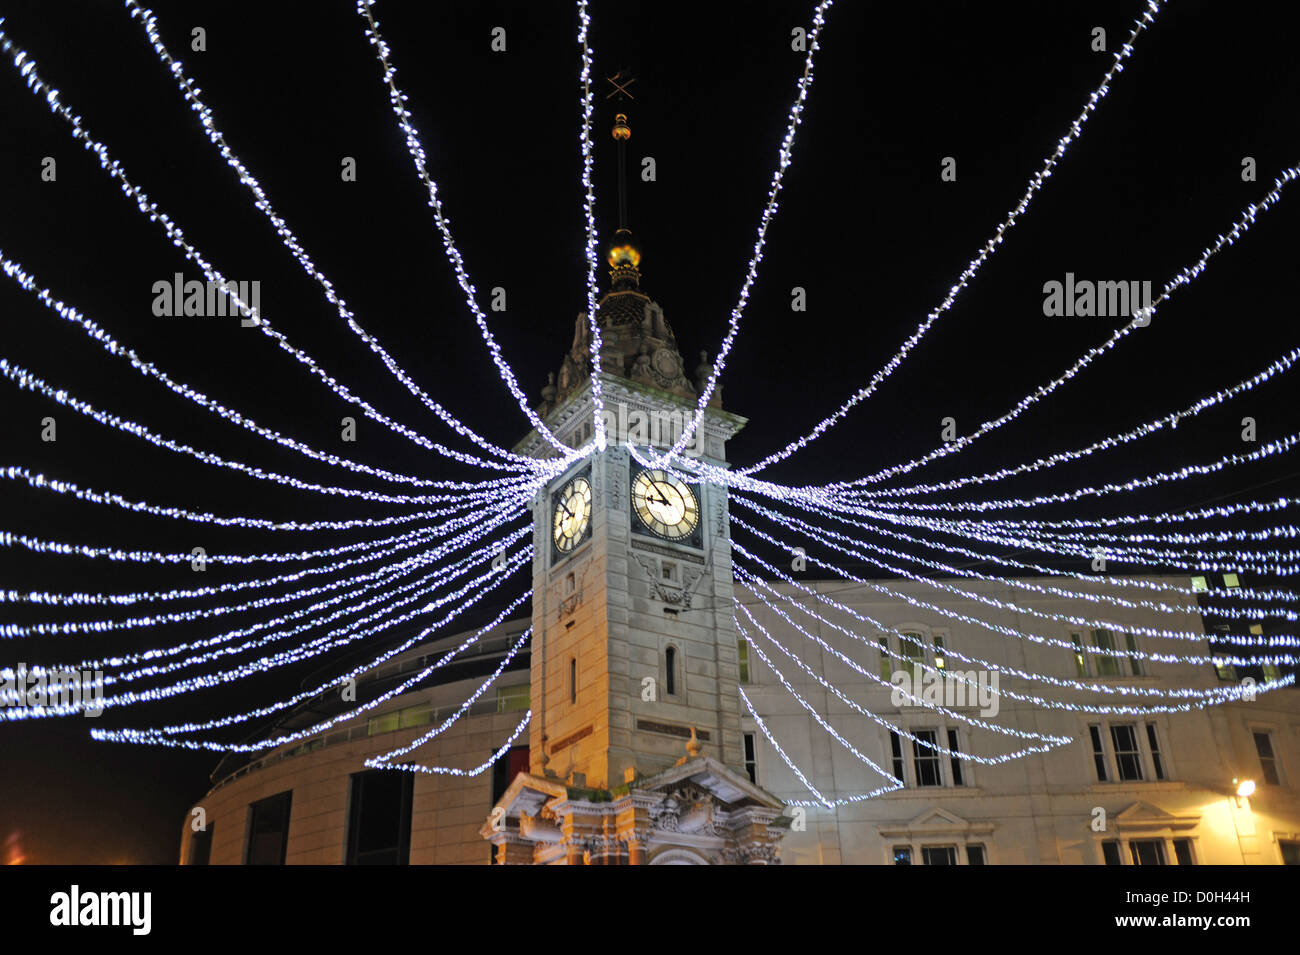 Christmas lights decorations around the clock tower in Brighton city